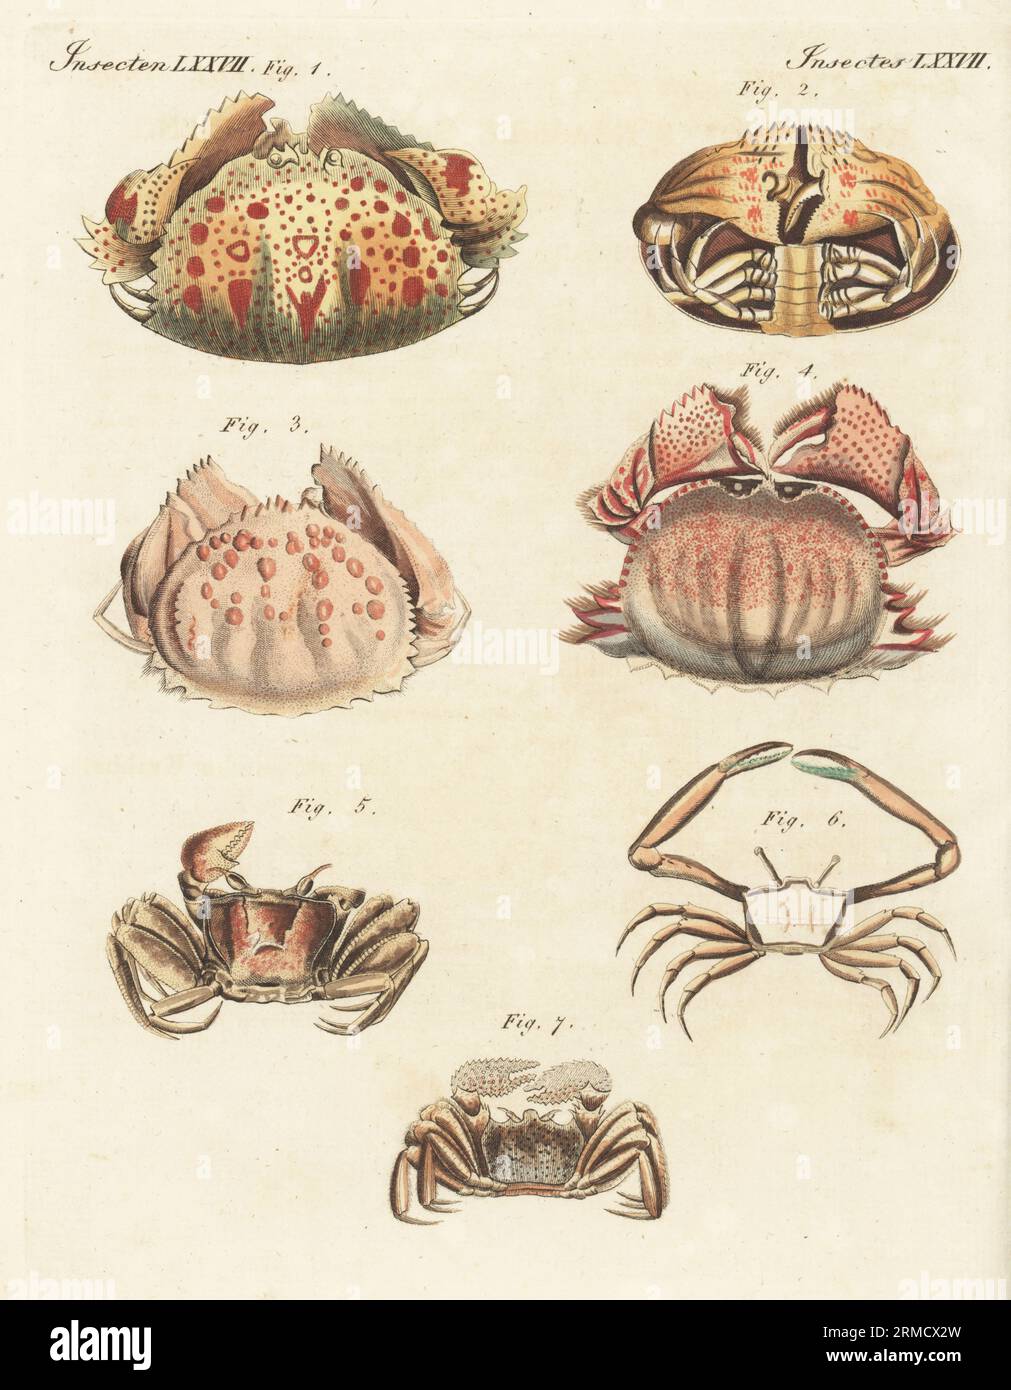 Smooth box crab, Calappa calappa 1,2, shame-faced crab or box crab, Calappa granulata 3, Calappa lophos 4, tufted ghost crab, Ocypode cursor 5, angular crab, Goneplax rhomboides 6, and Cancer albicans 7. Handcoloured copperplate engraving from Carl Bertuch's Bilderbuch fur Kinder (Picture Book for Children), Weimar, 1815. A 12-volume encyclopedia for children illustrated with almost 1,200 engraved plates on natural history, science, costume, mythology, etc., published from 1790-1830. Stock Photo